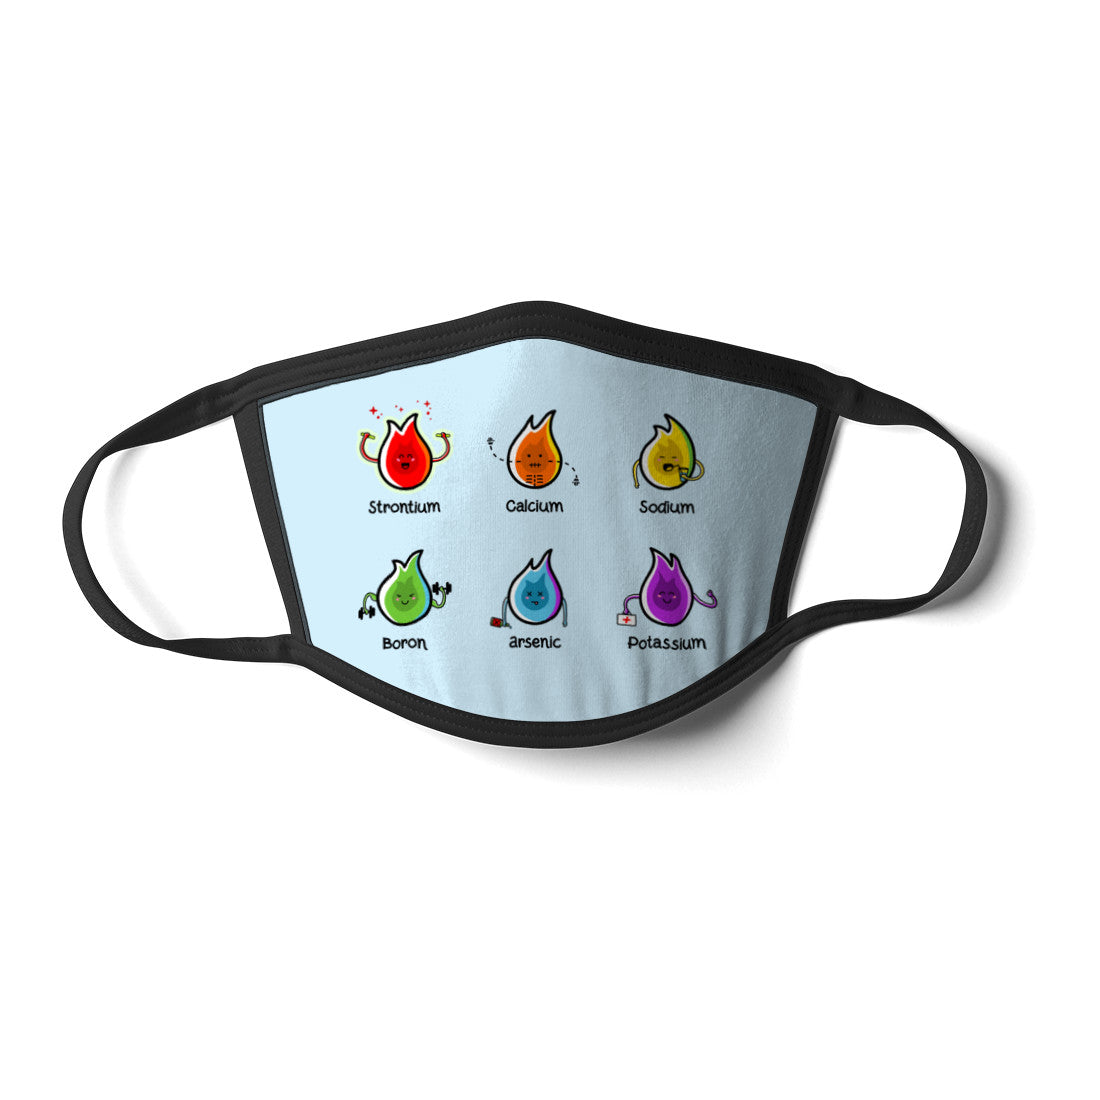 A pale blue rectangular face mask with black cords and a design of two rows of three cute flames representing different elements and the different coloured flames they burn with, the name of each element is written beneath each flame